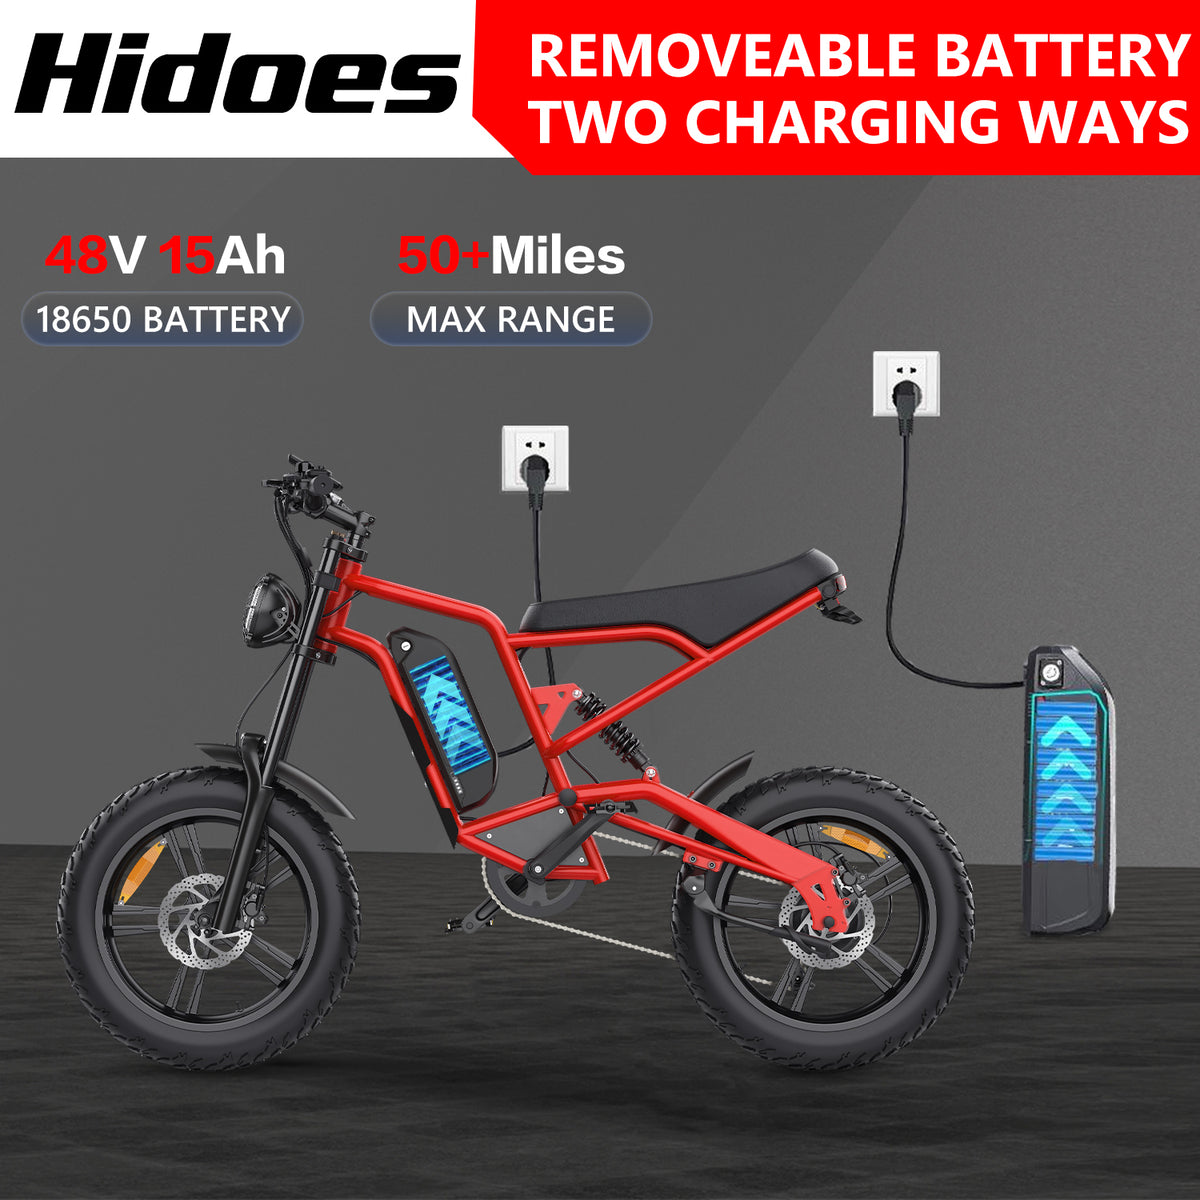 Hidoes B6 fat tire electric bike with 720Wh battery